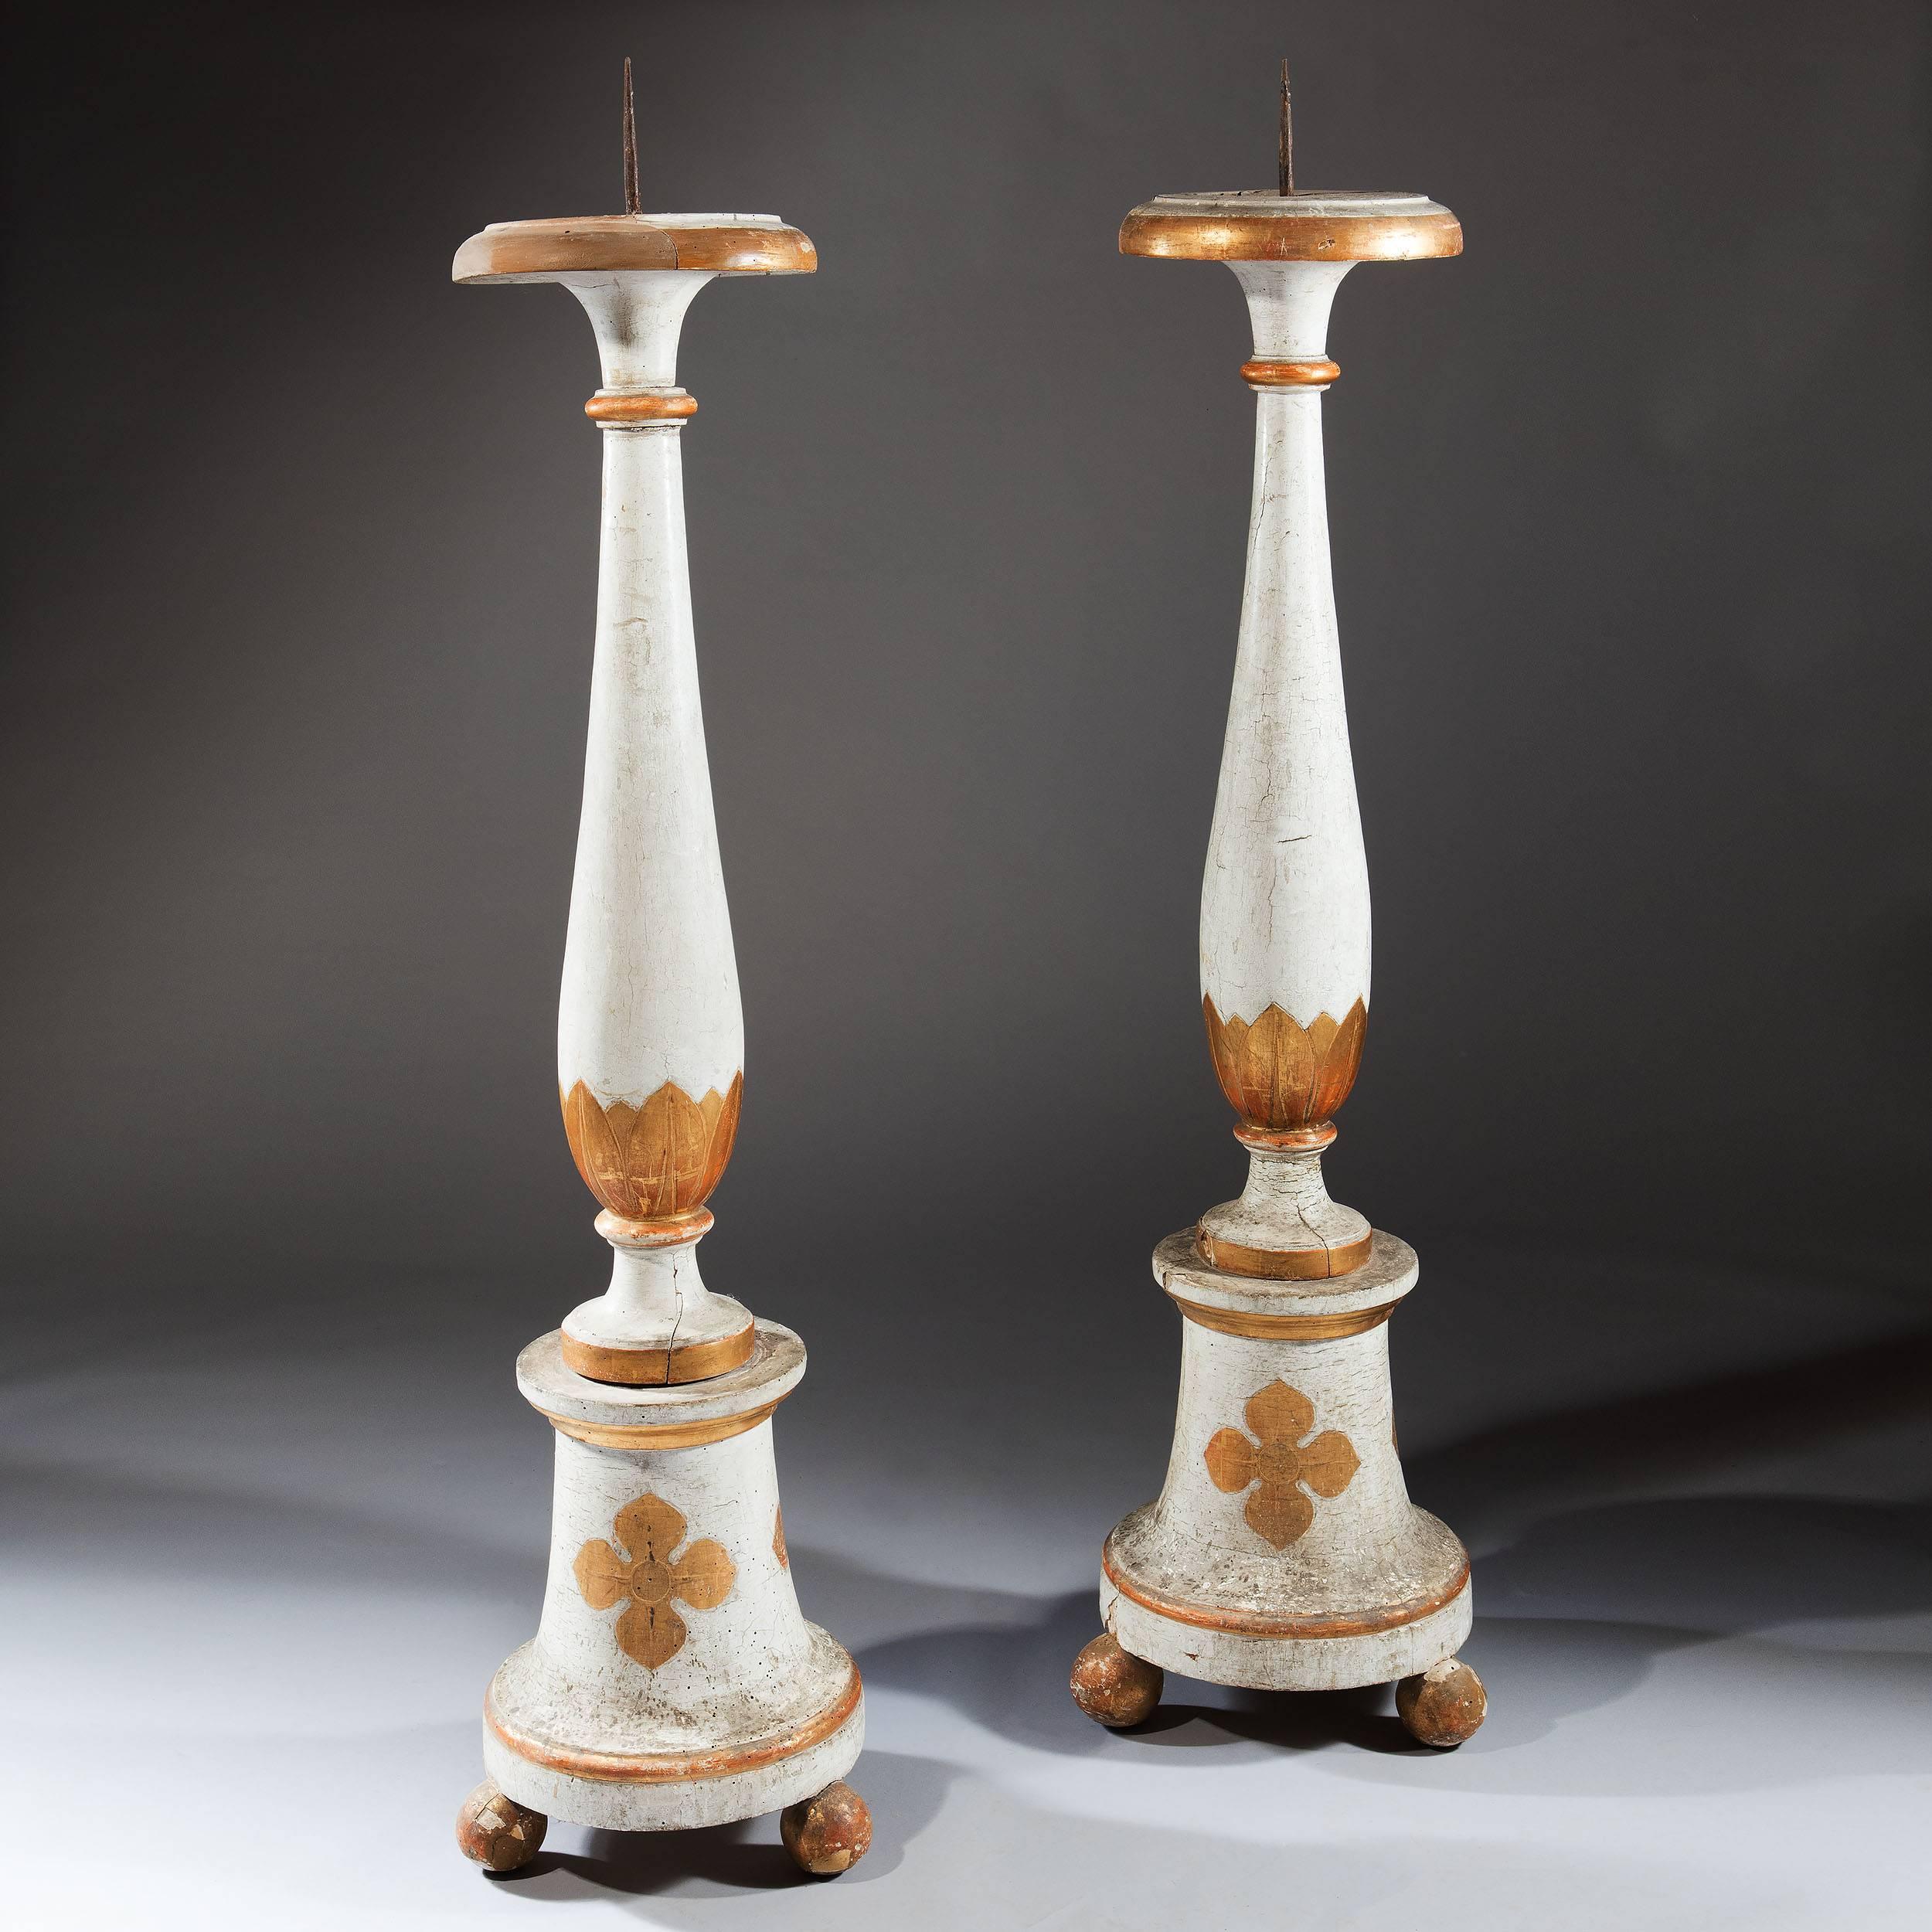 Pair of White and Gold North Italian 18th Century Torcheres In Good Condition In London, by appointment only